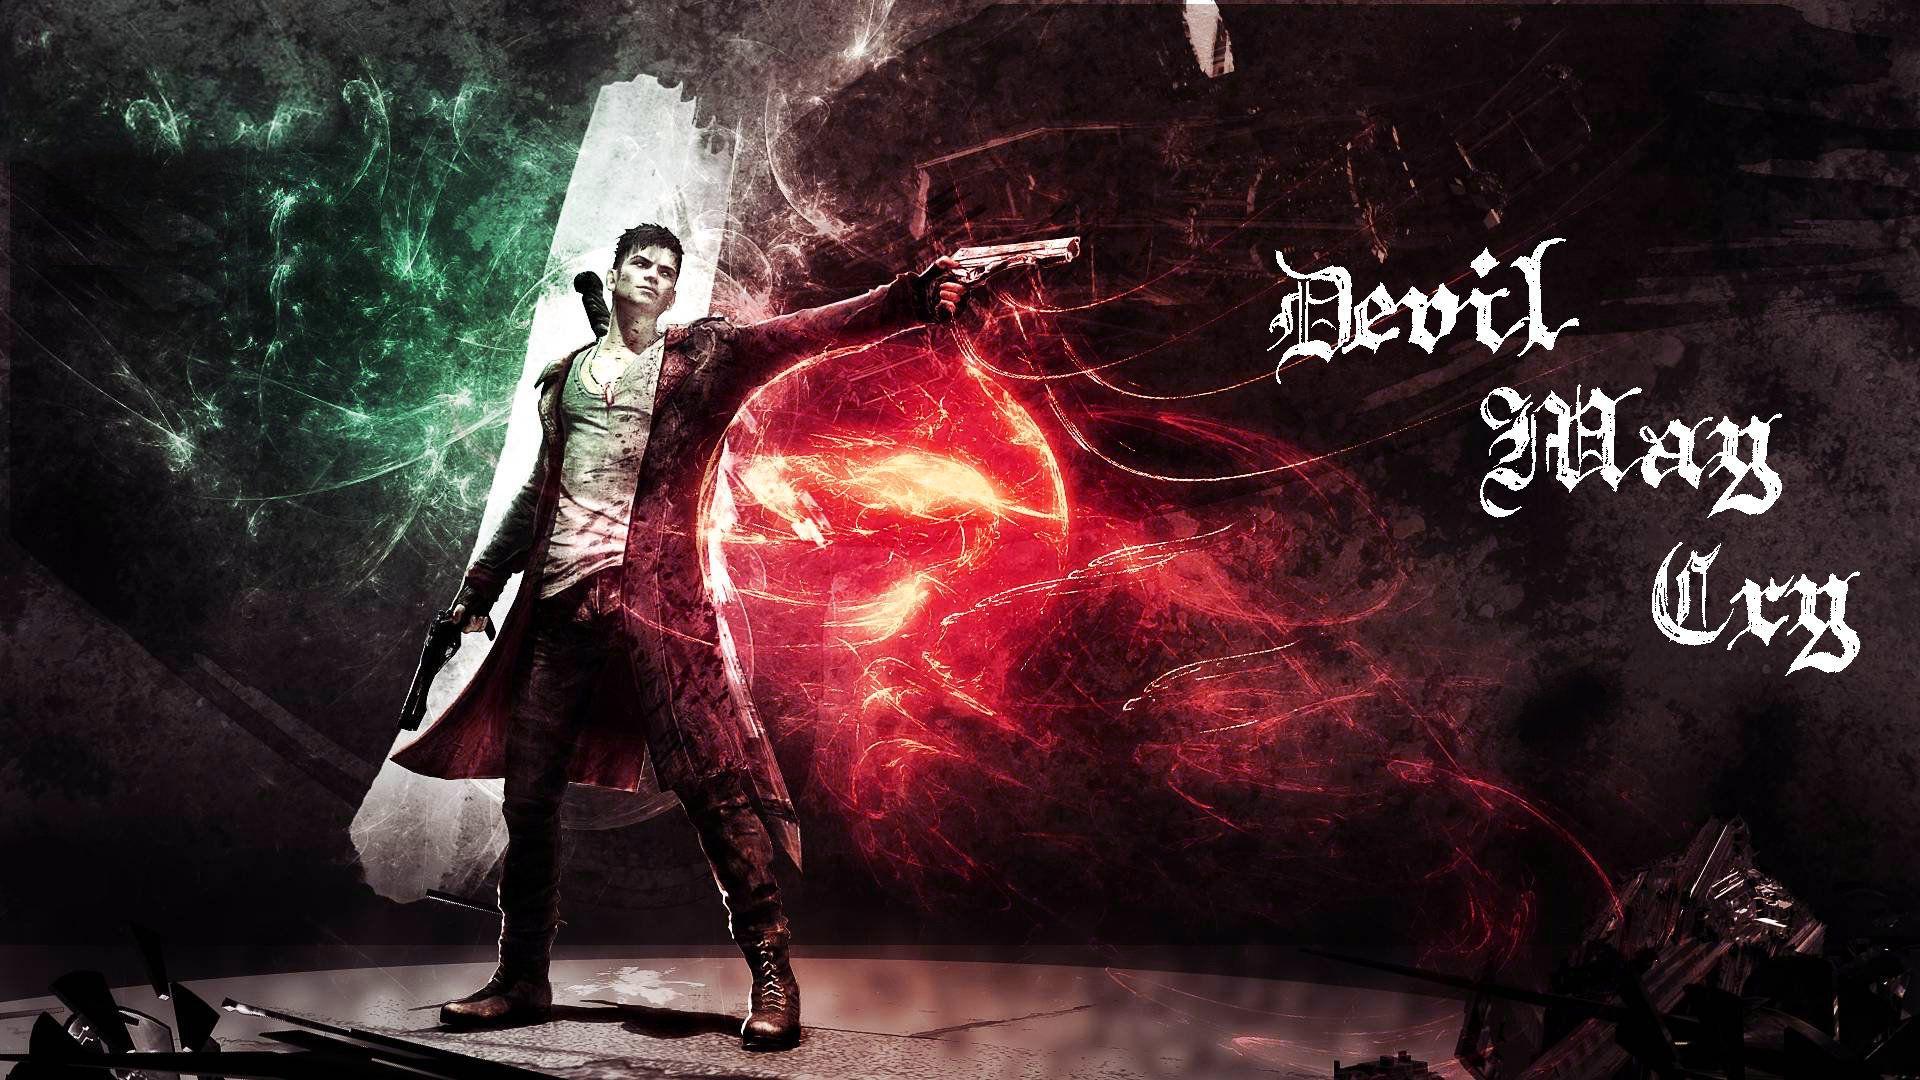 Dmc Devil May Cry Wallpapers Top Free Dmc Devil May Cry Backgrounds Wallpaperaccess